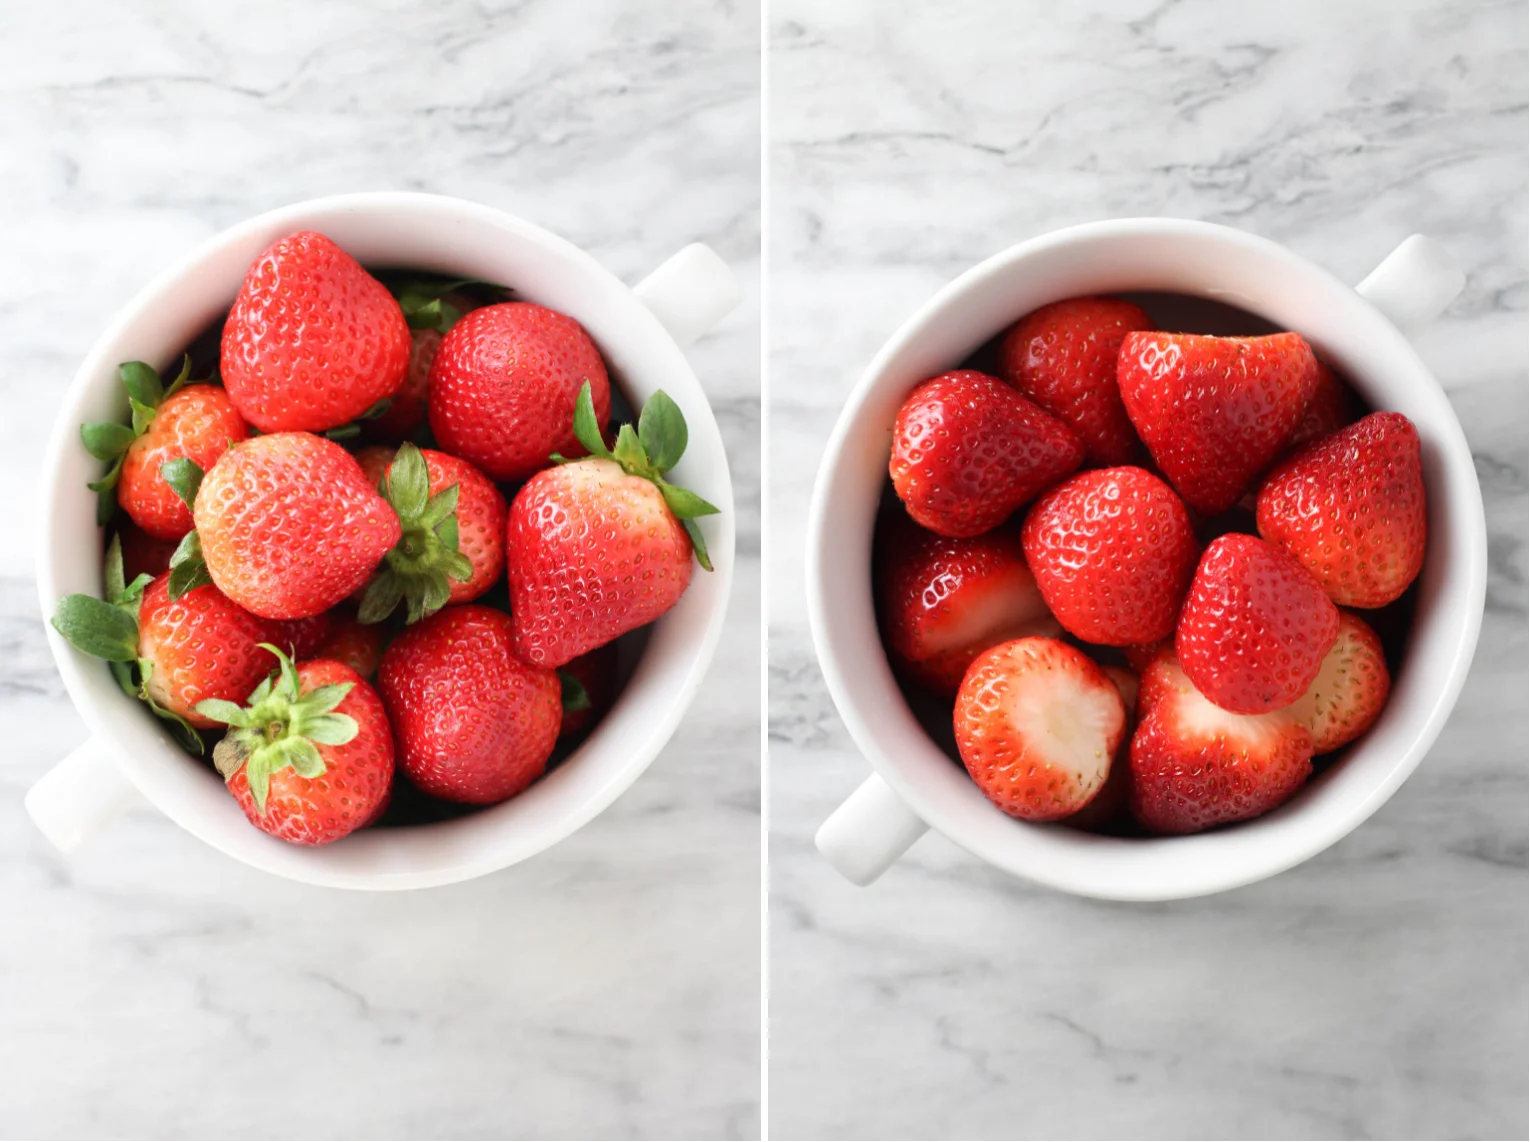 Two side-by-side images. On the left image, a bowl of fresh strawberries. On the right image, a bowl of hulled strawberries.